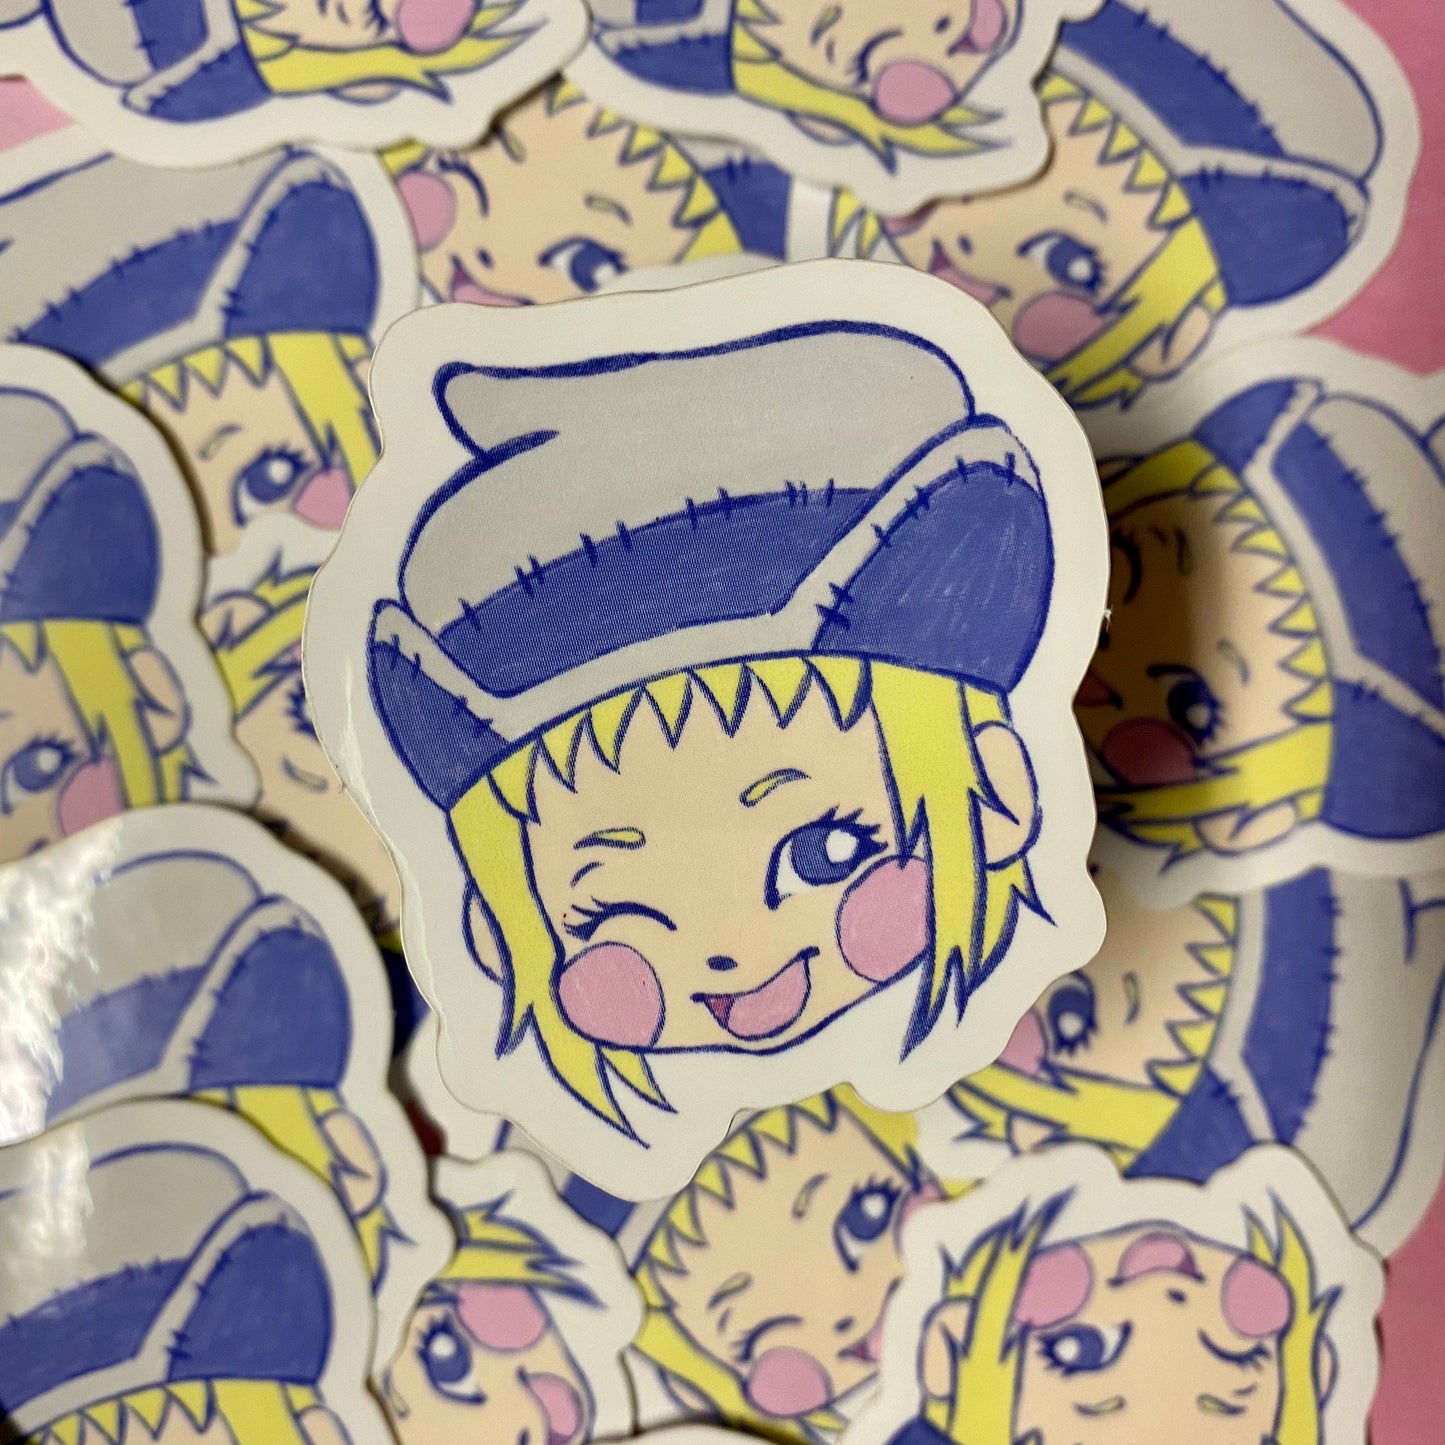 Chibi Soul Eater Sticker Pack (8 Stickers!!)